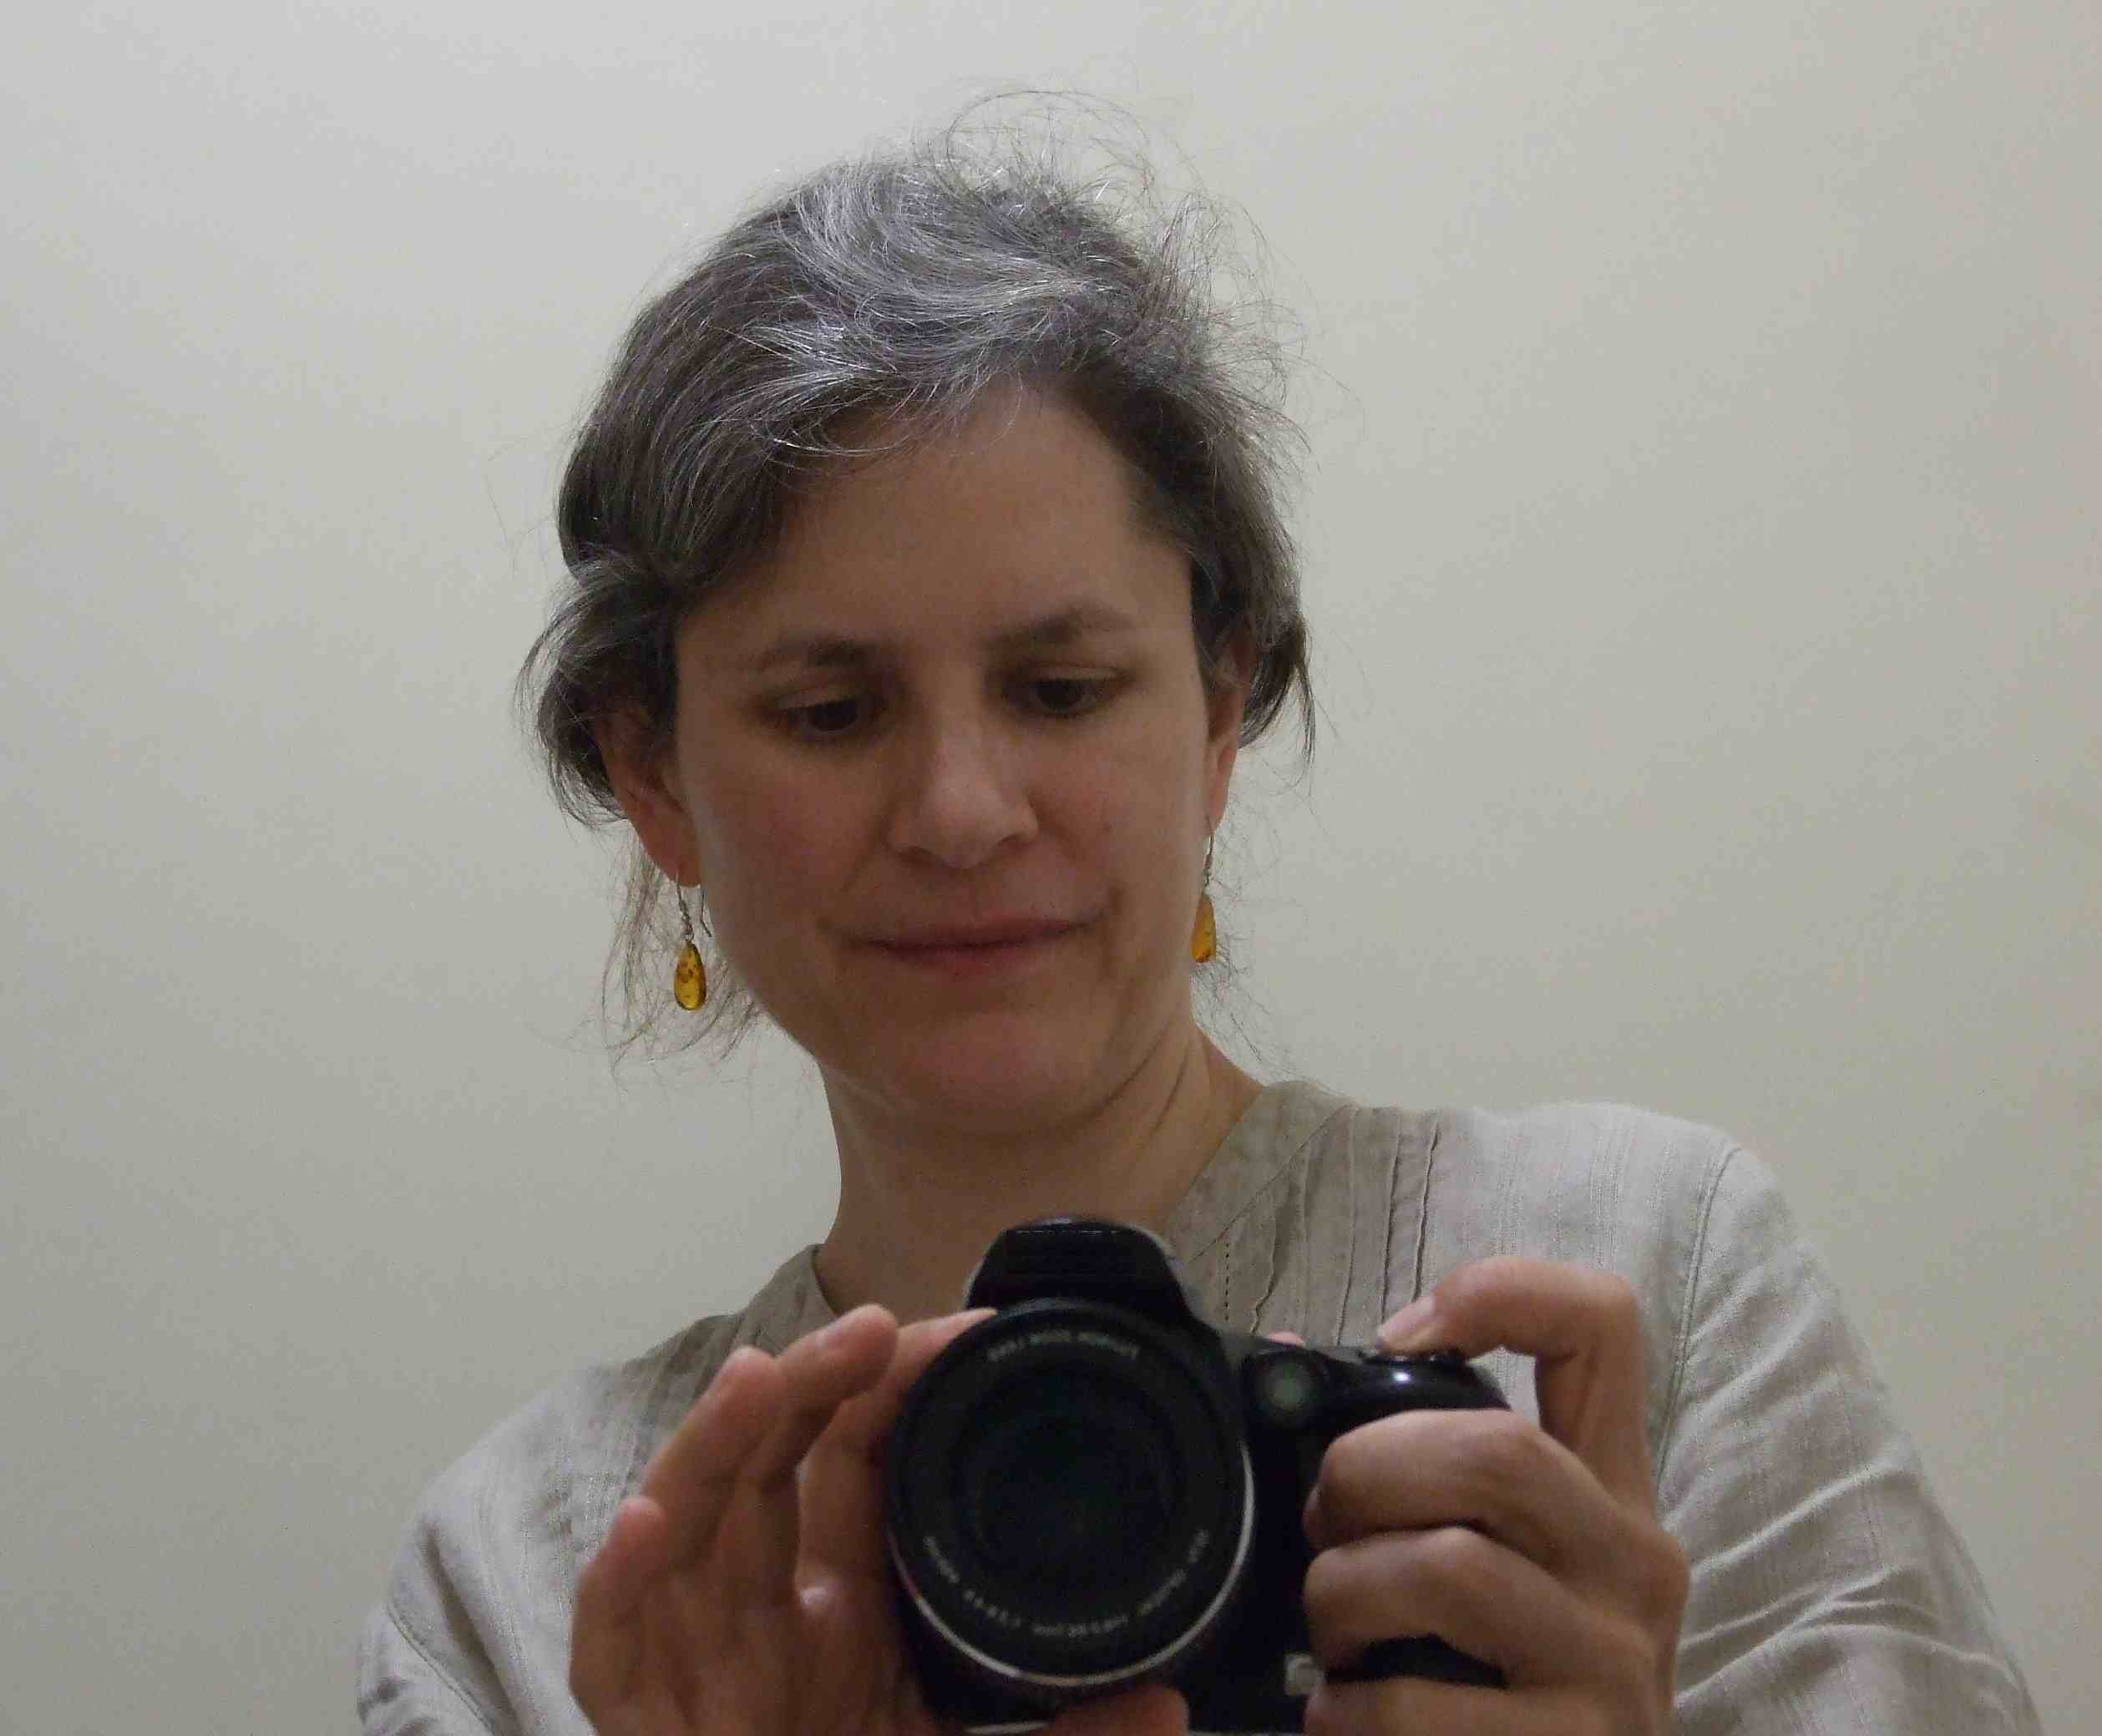 Gabriele Twohig, a female photographer holding a camera, taking a self portrait in the mirror